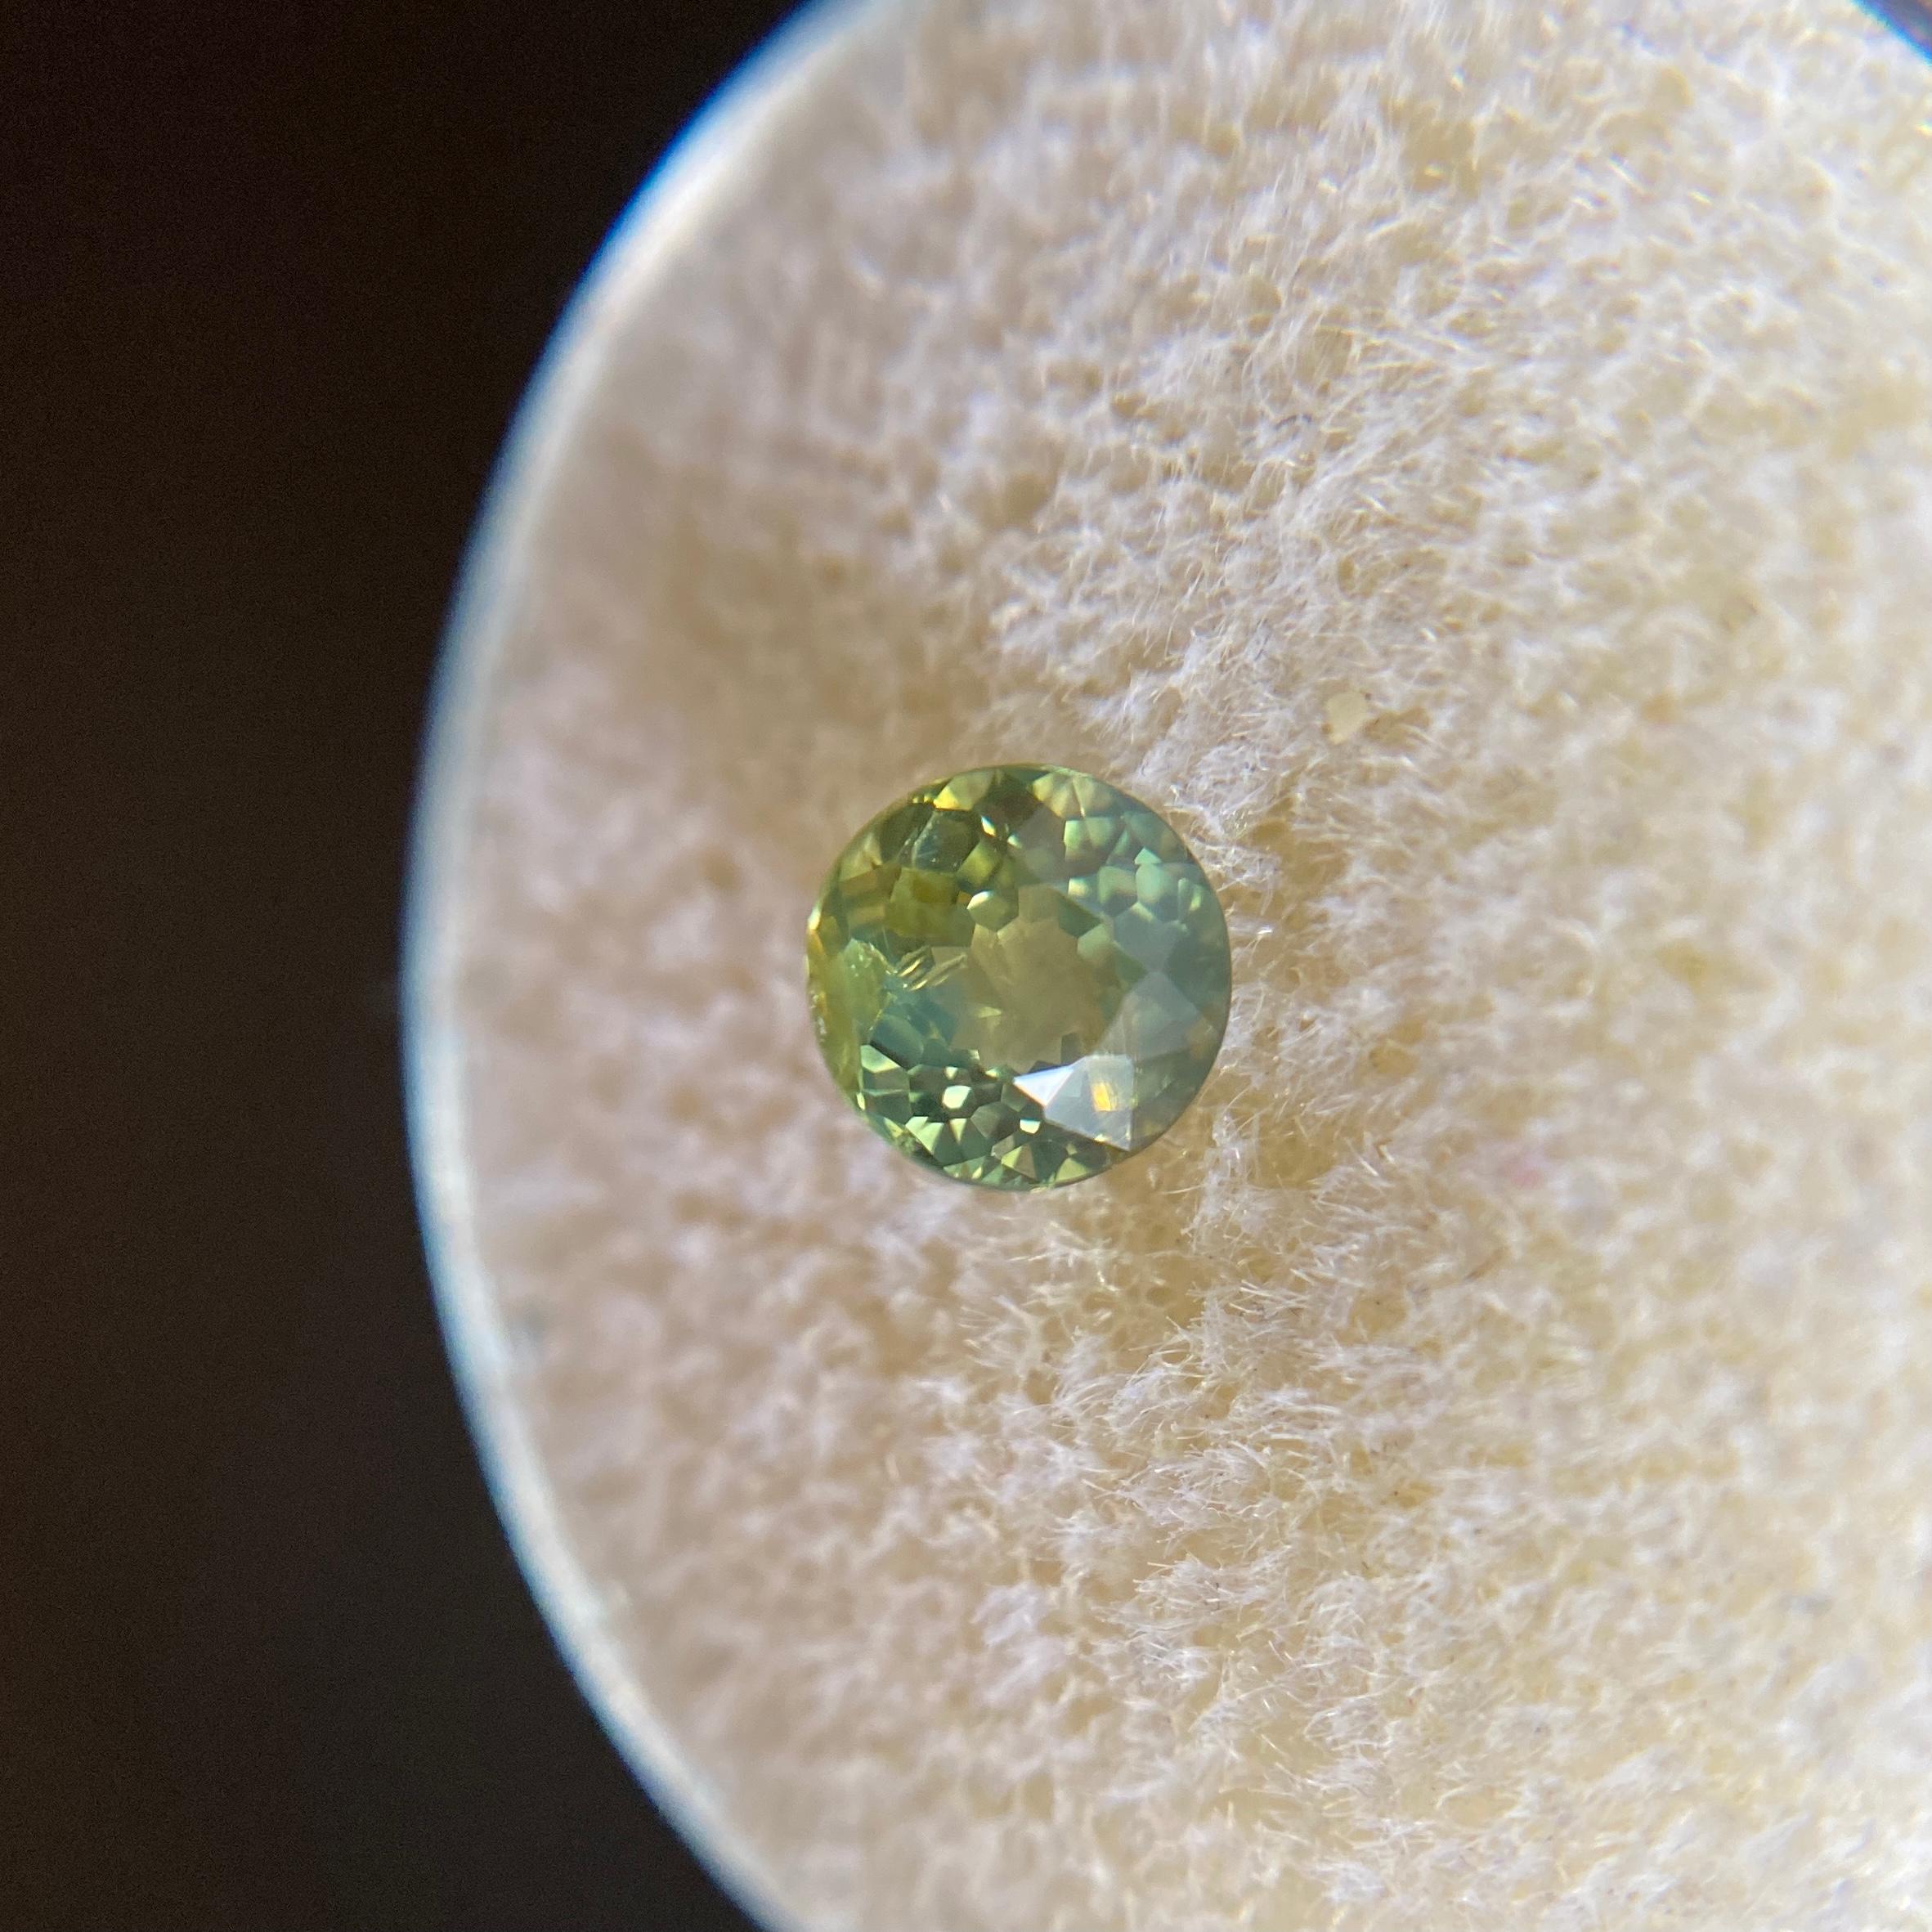 Rare Green Yellowish Parti Colour Australian Sapphire Gemstone.

0.88 Carat with a beautiful and unique green yellow colour. Very rare and stunning to see. Also has good clarity, a clean stone with only some small natural inclusions visible when